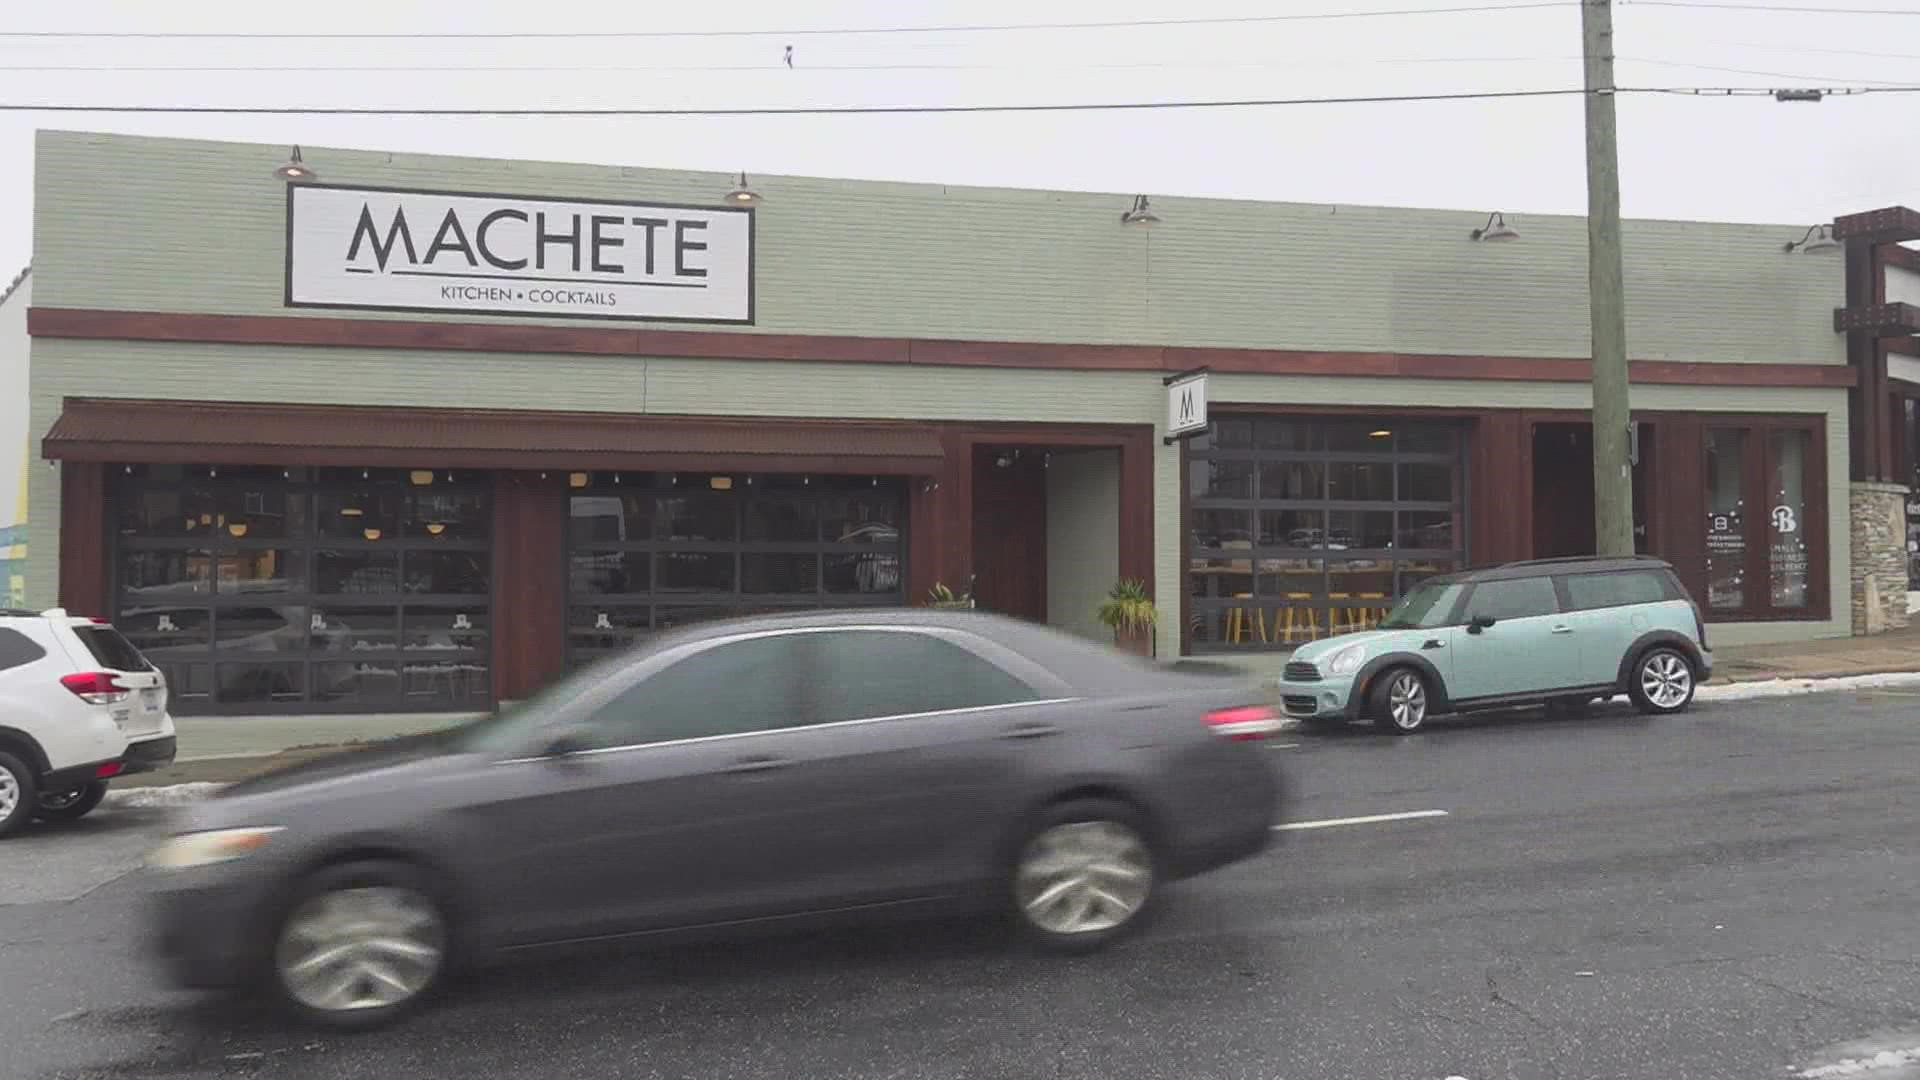 Yelp named Machete the number 18 restaurant to try in its 9th annual list of top places to eat in the U.S.